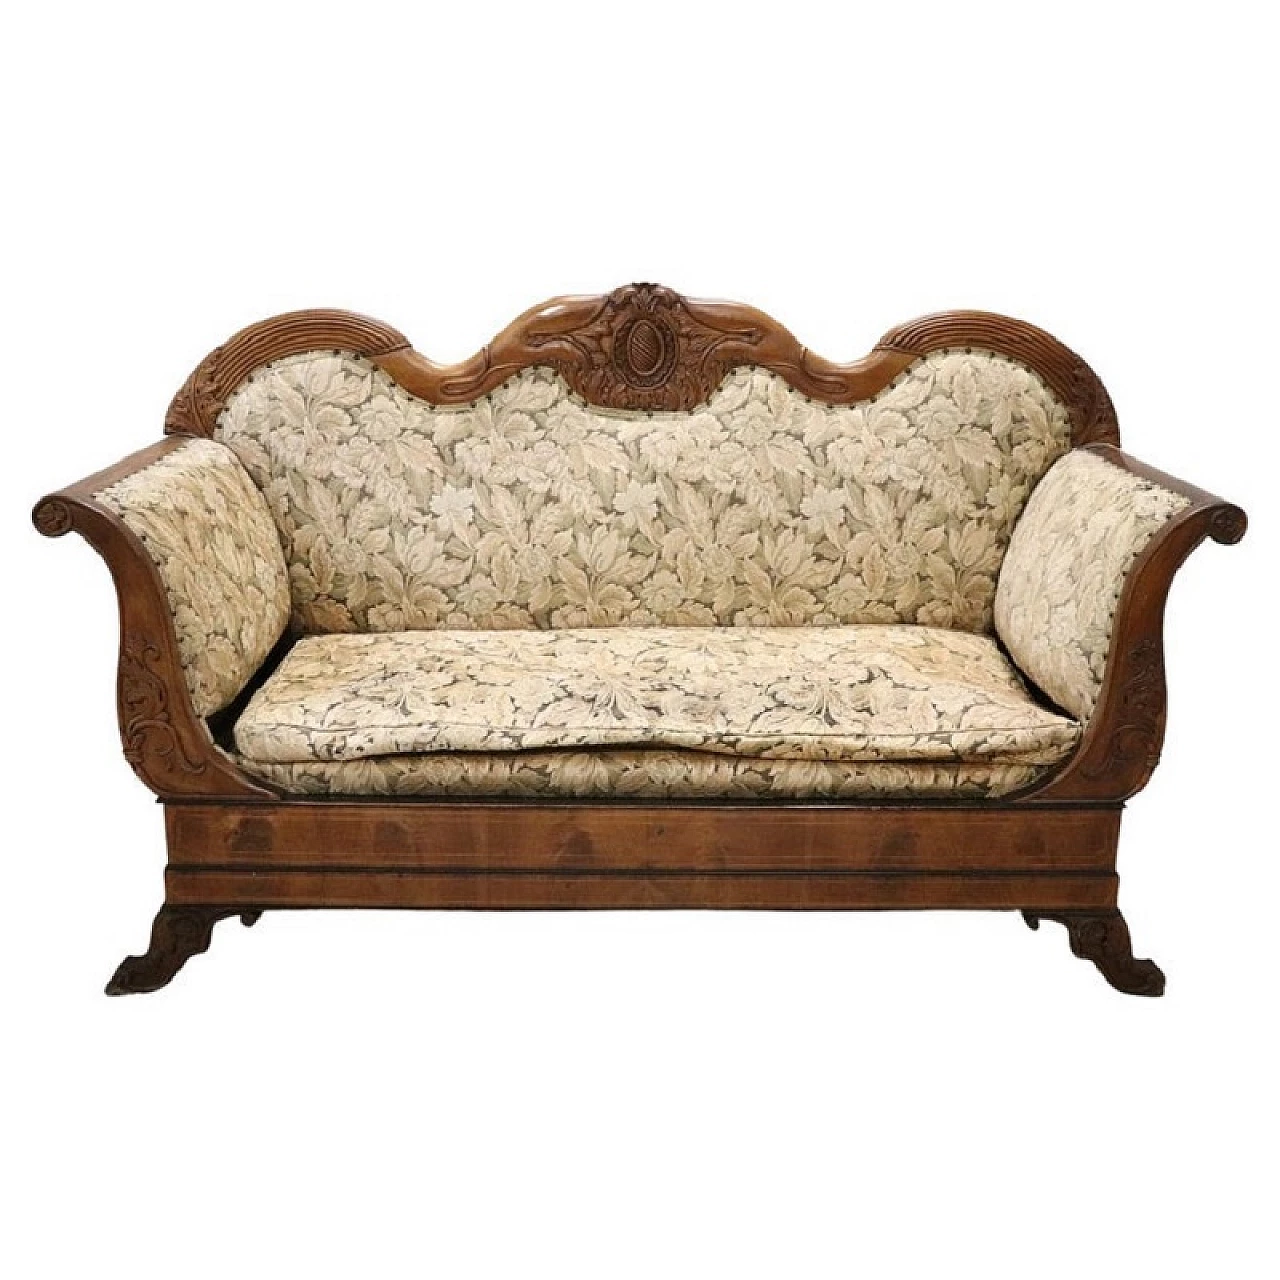 Charles X walnut boat-shaped sofa with carved decoration, 19th century 1